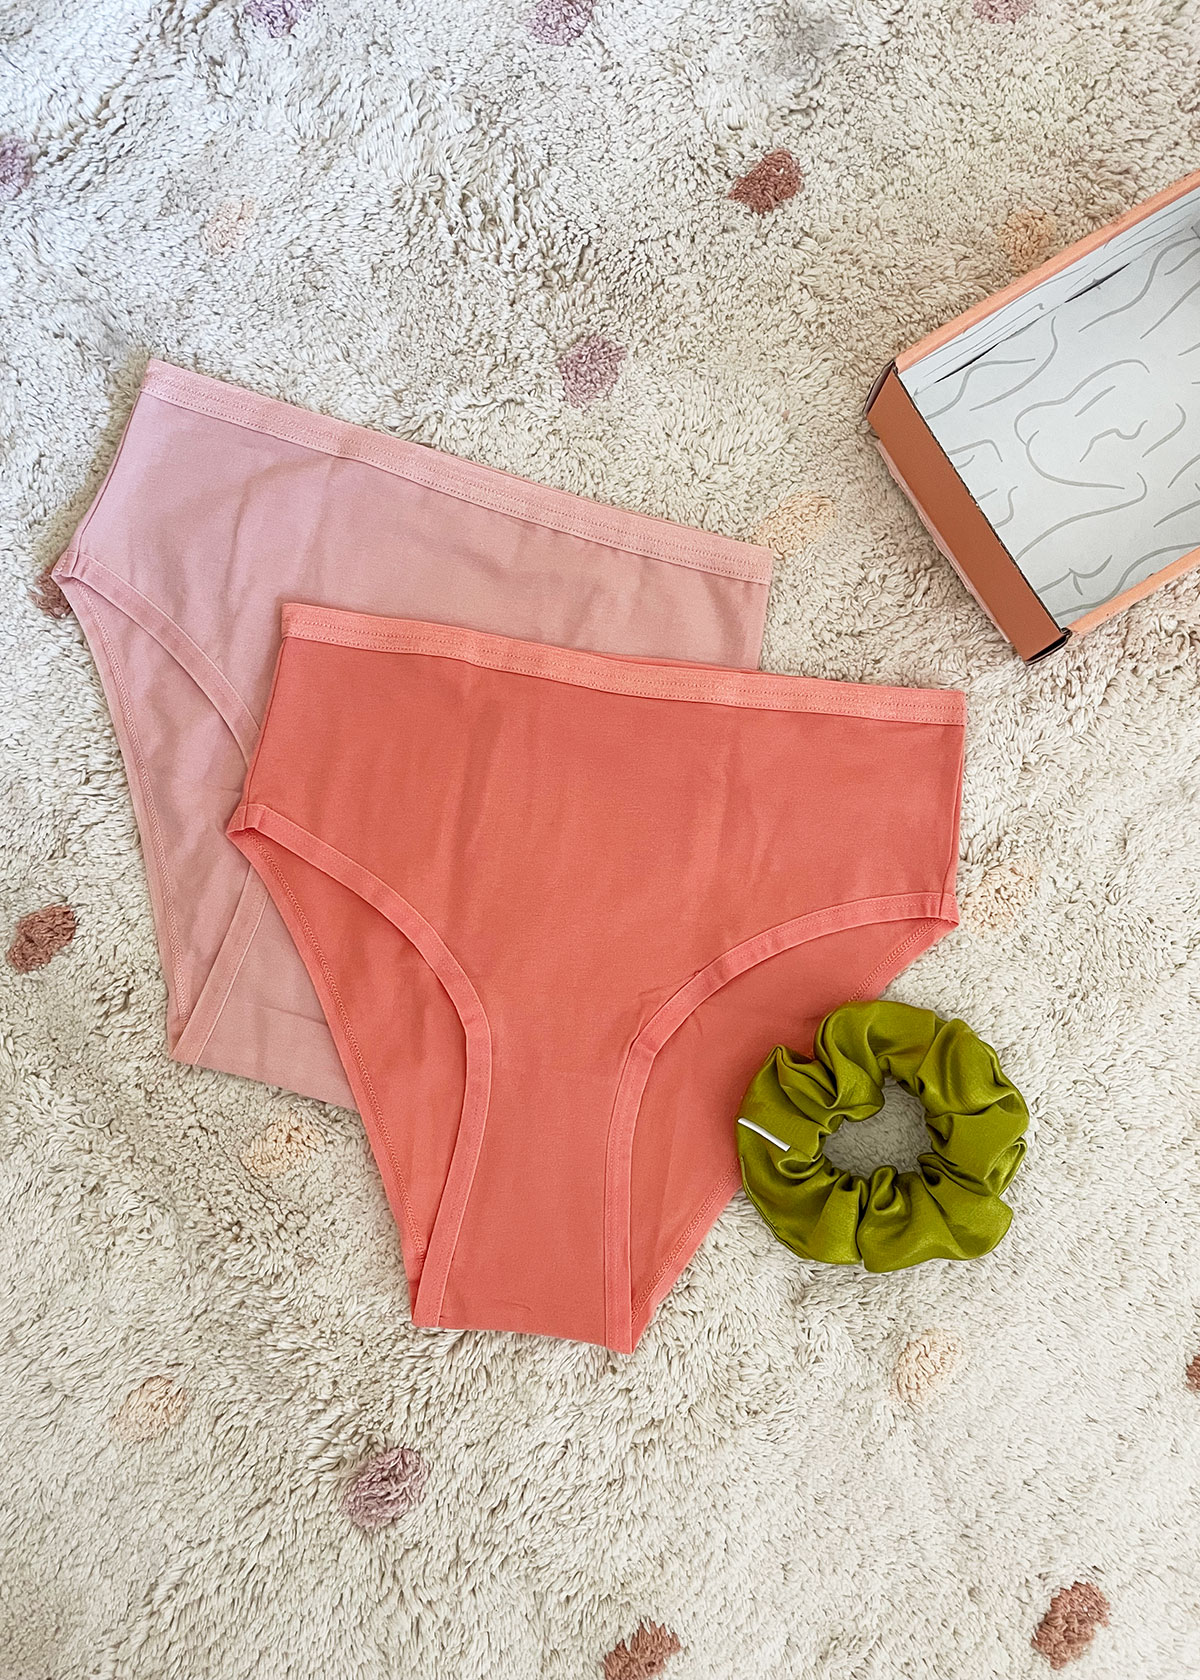 Knickey Underwear Review — Great-Fitting & Organic